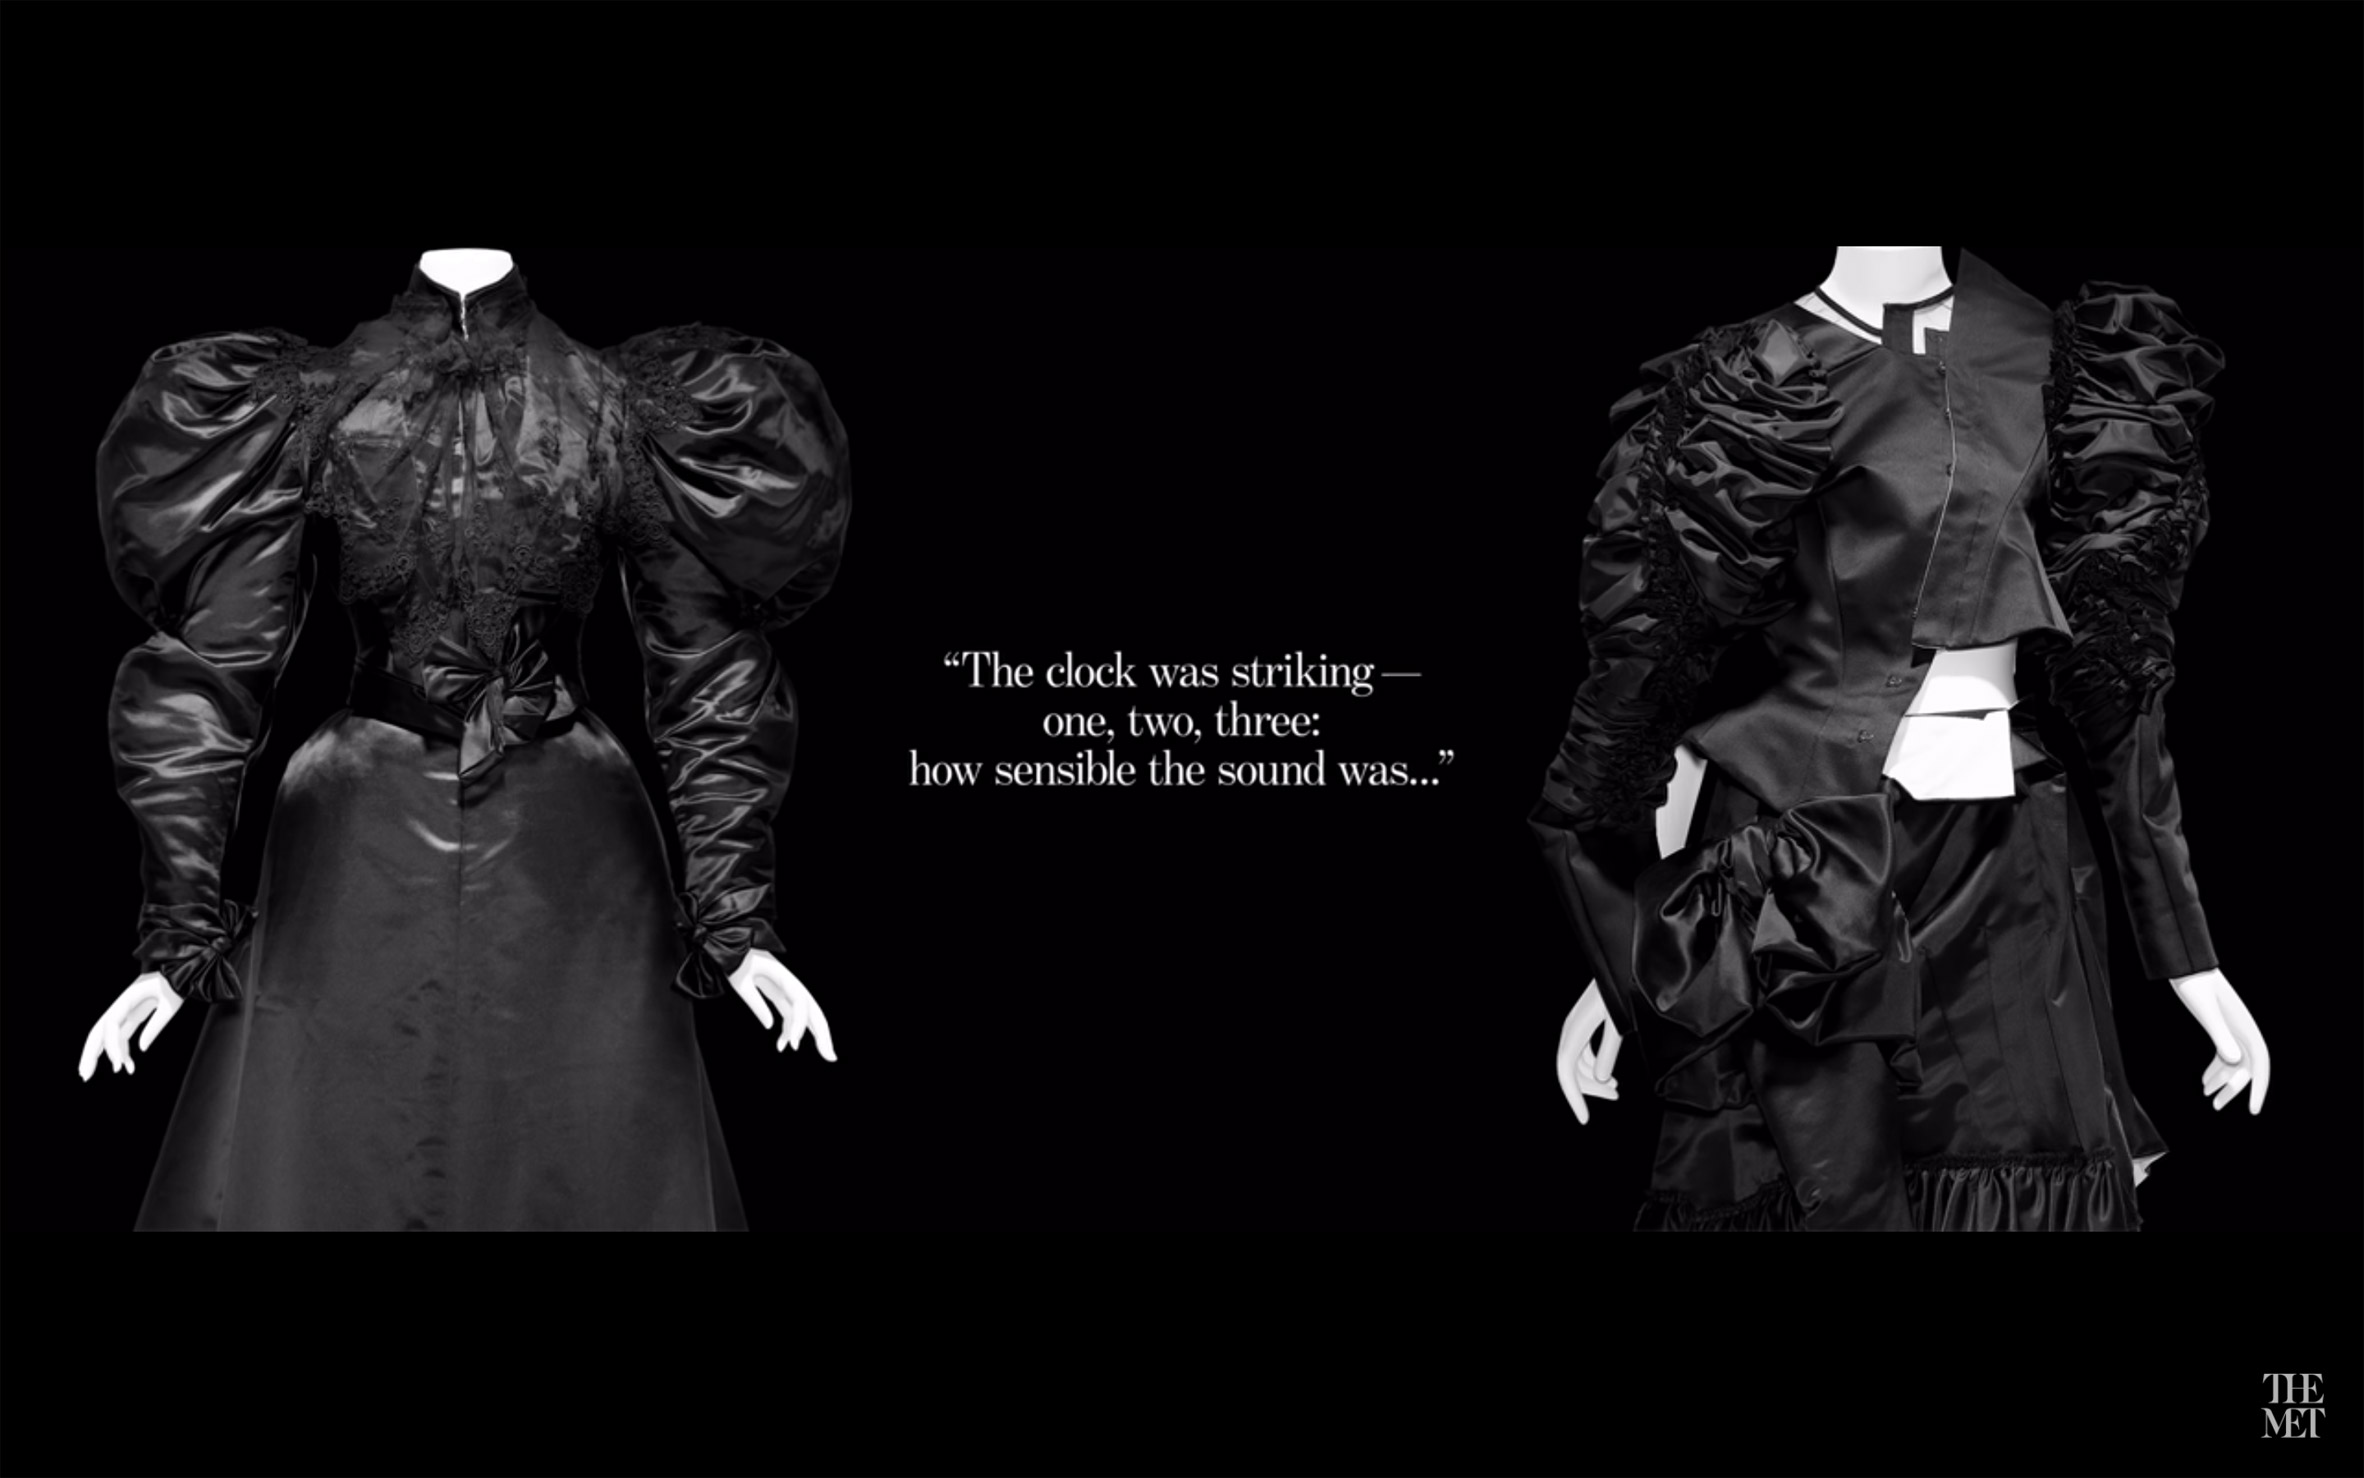 Preview The Met's postponed About Time: Fashion and Duration exhibition